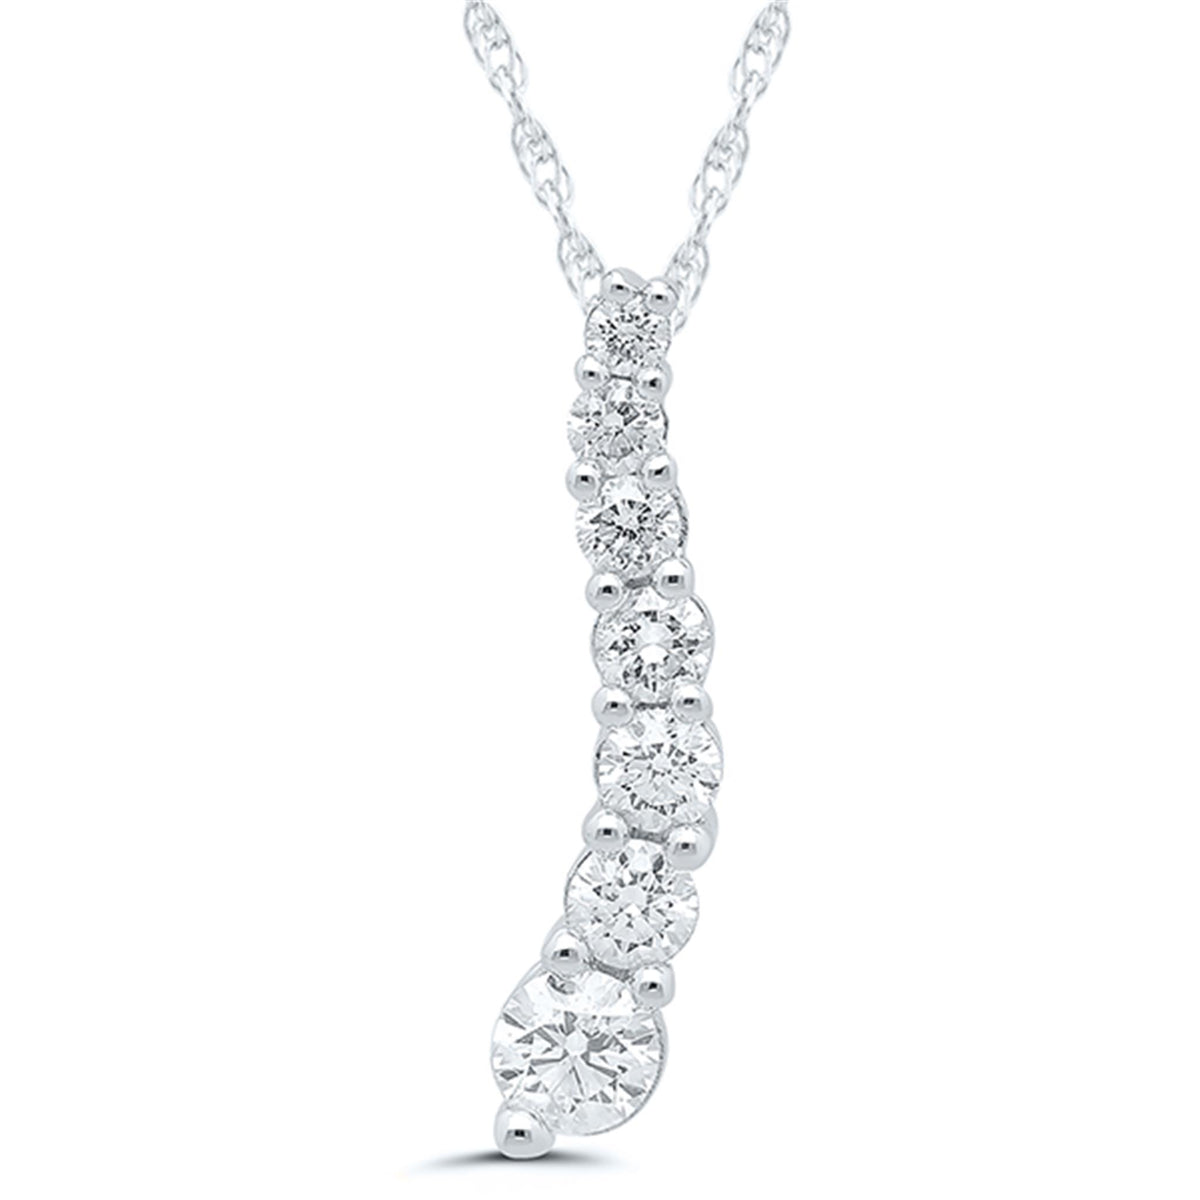 14Kt White Gold Journey Pendant With 0.25cttw Natural Diamonds